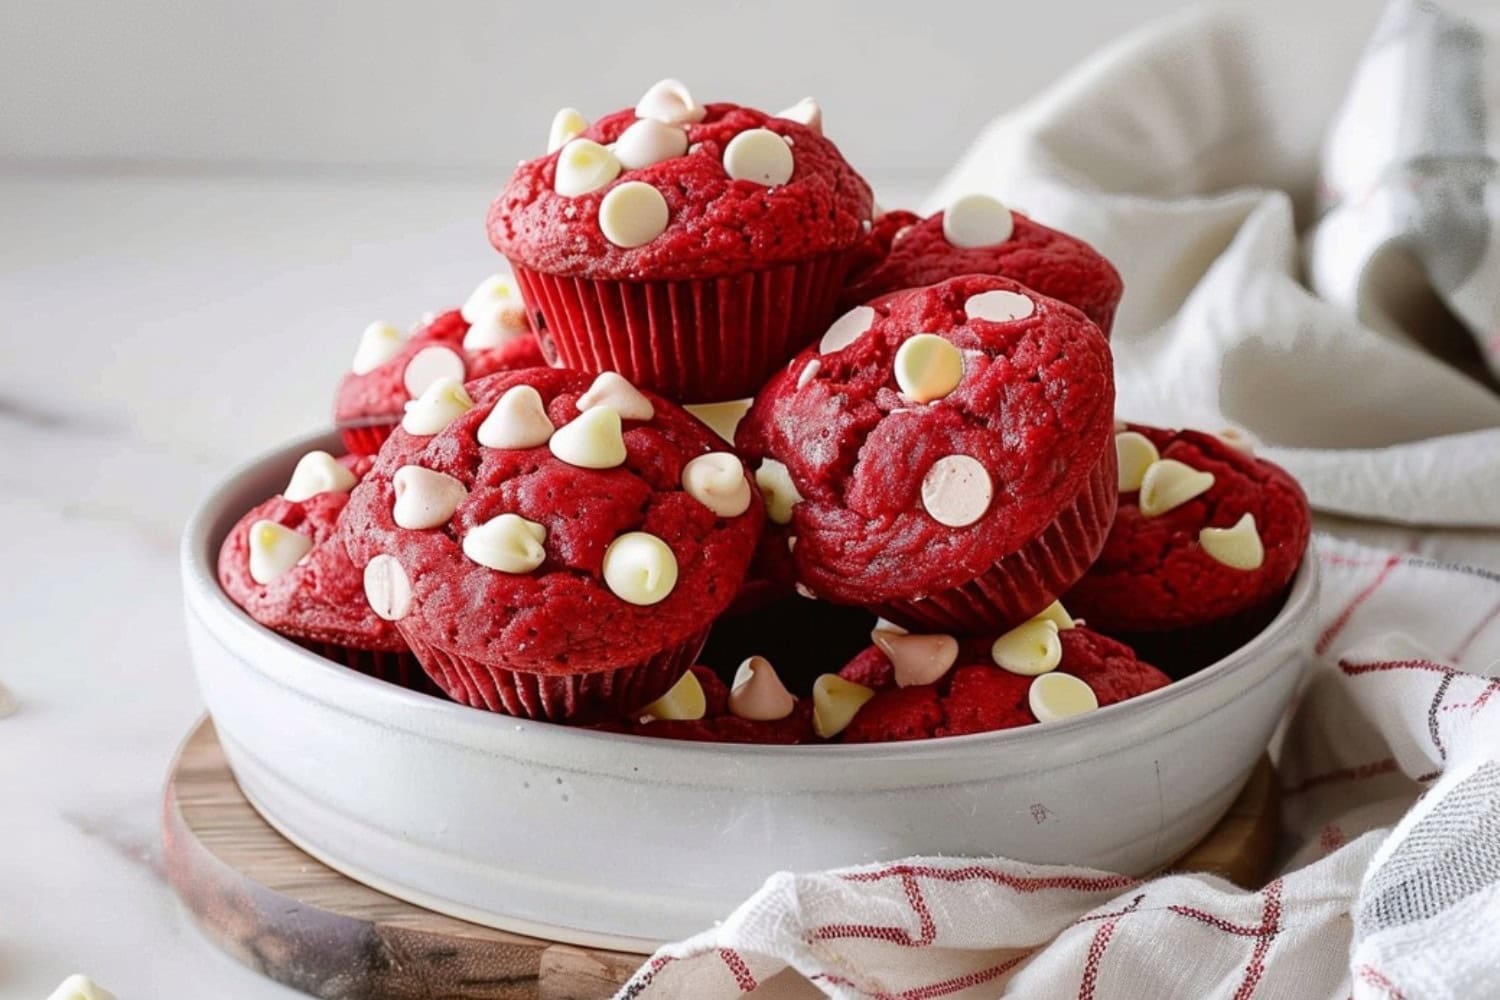 Bunch of red velvet muffins arranged in a shallow bowl.